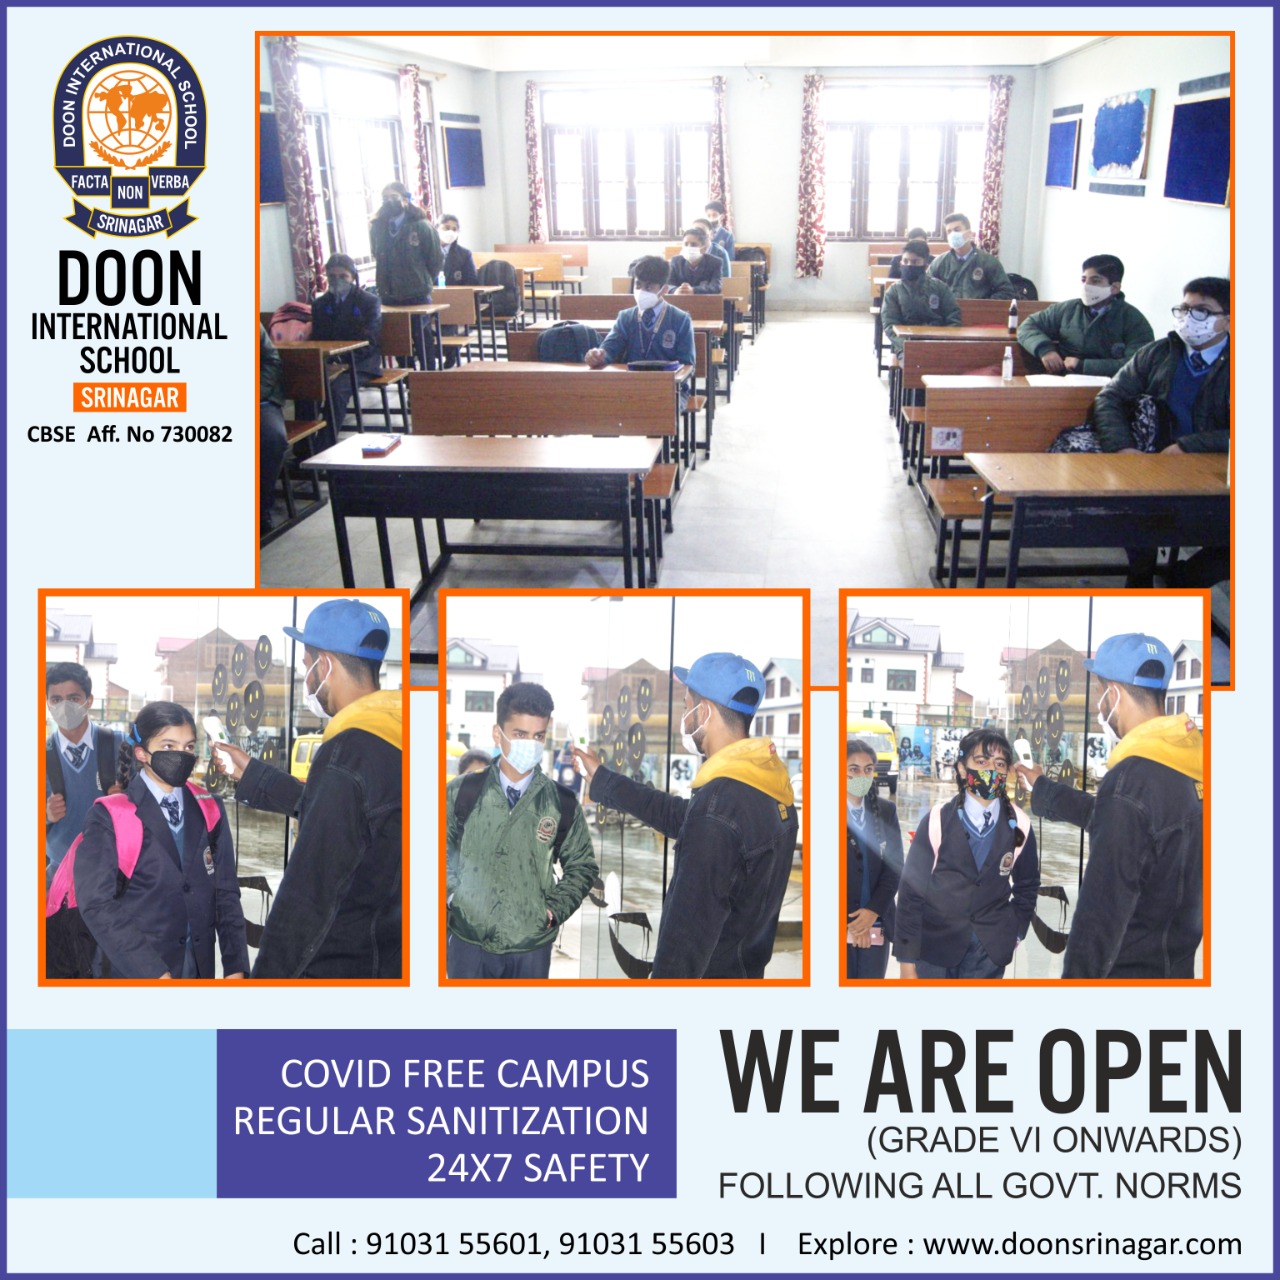 Reopening of School after COVID-19